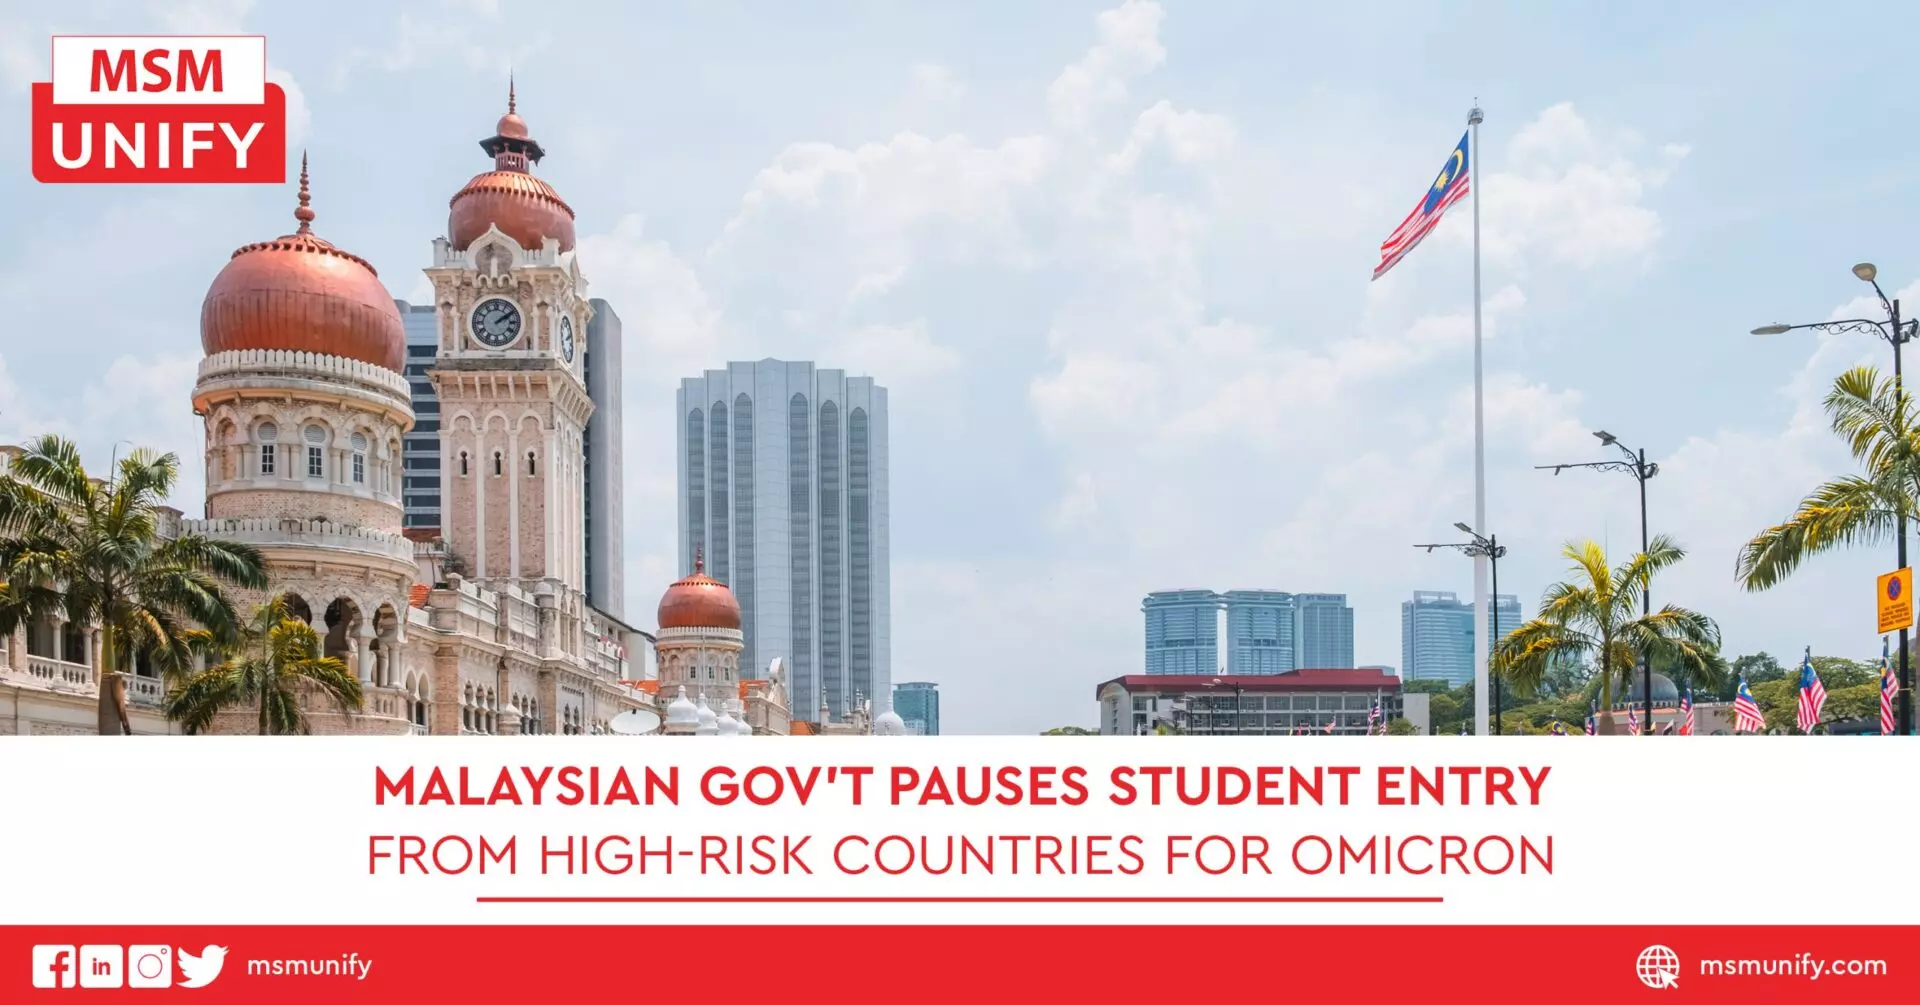 Malaysian Govt Pauses Student Entry From High Risk Countries for Omicron scaled 1